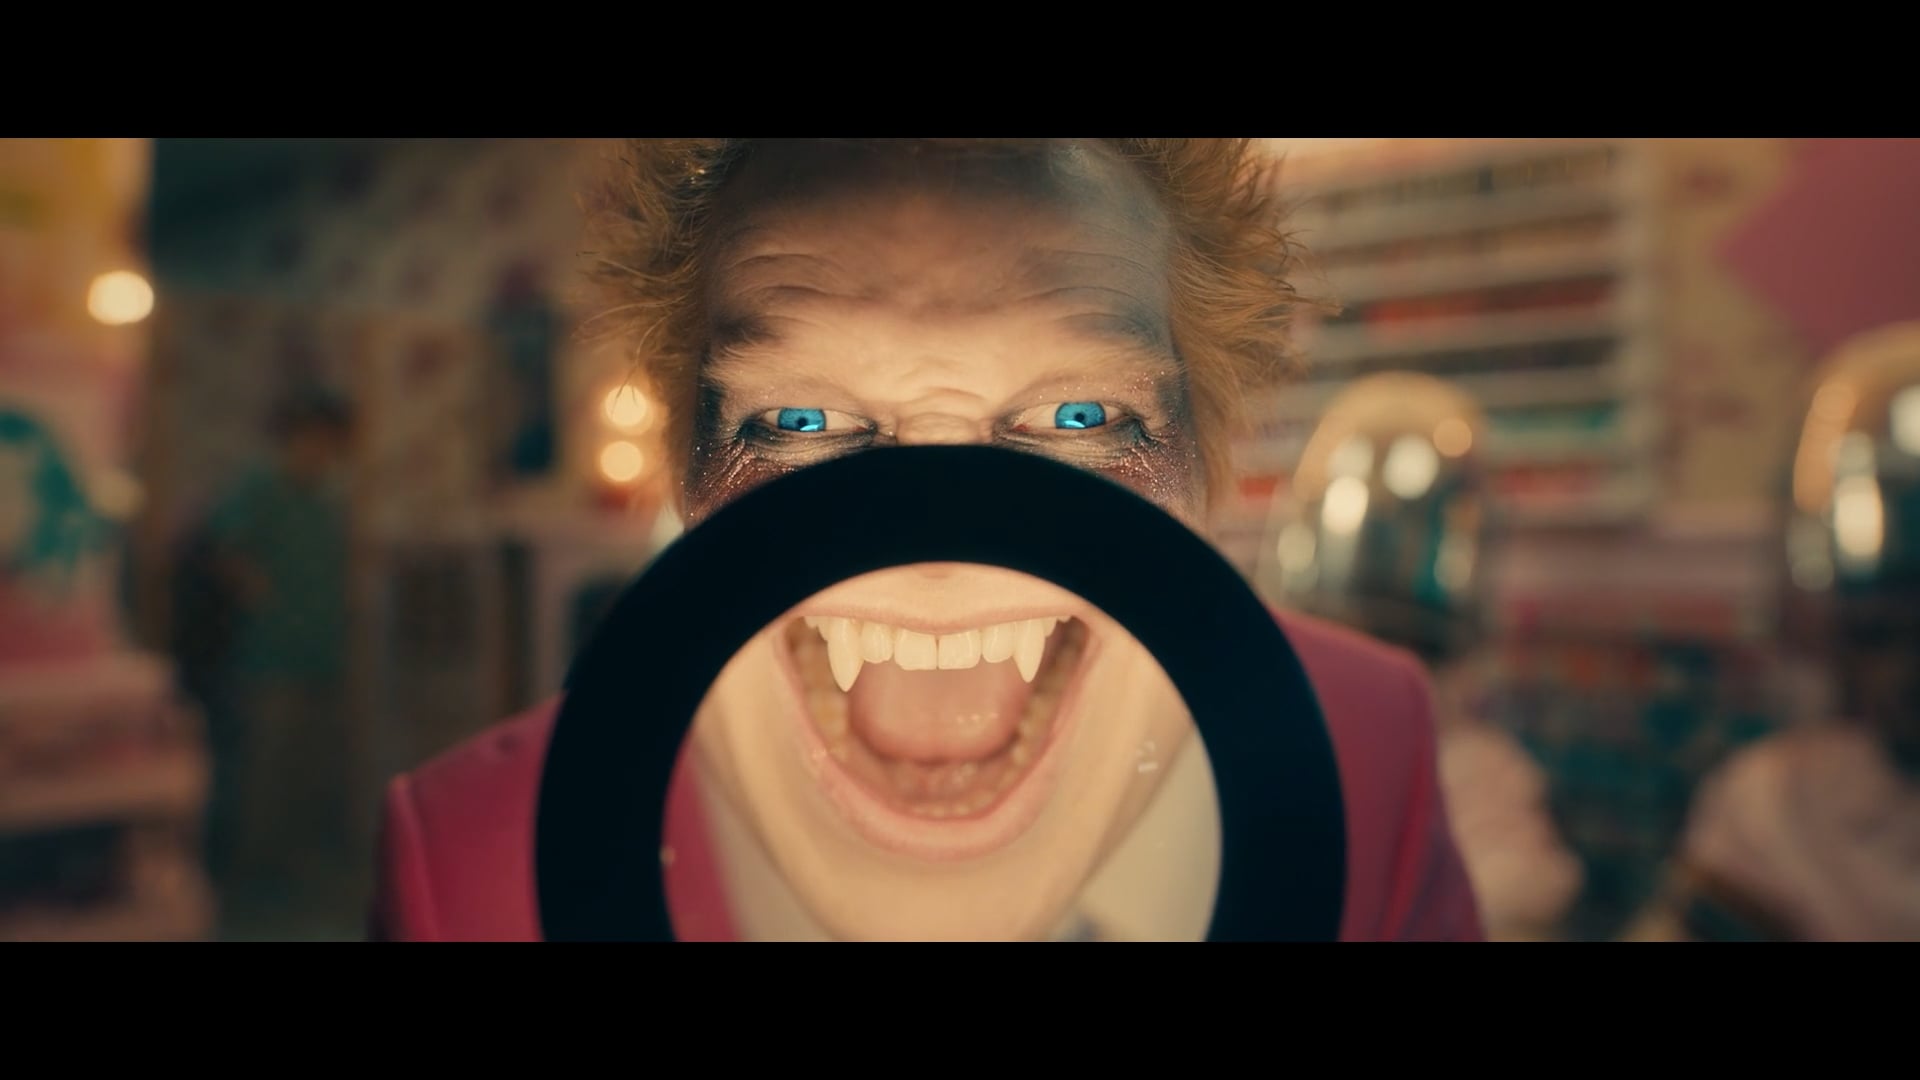 Ed Sheeran 'Bad Habits' Line Produced for Freenjoy at Somesuch, directed by Dave Meyers